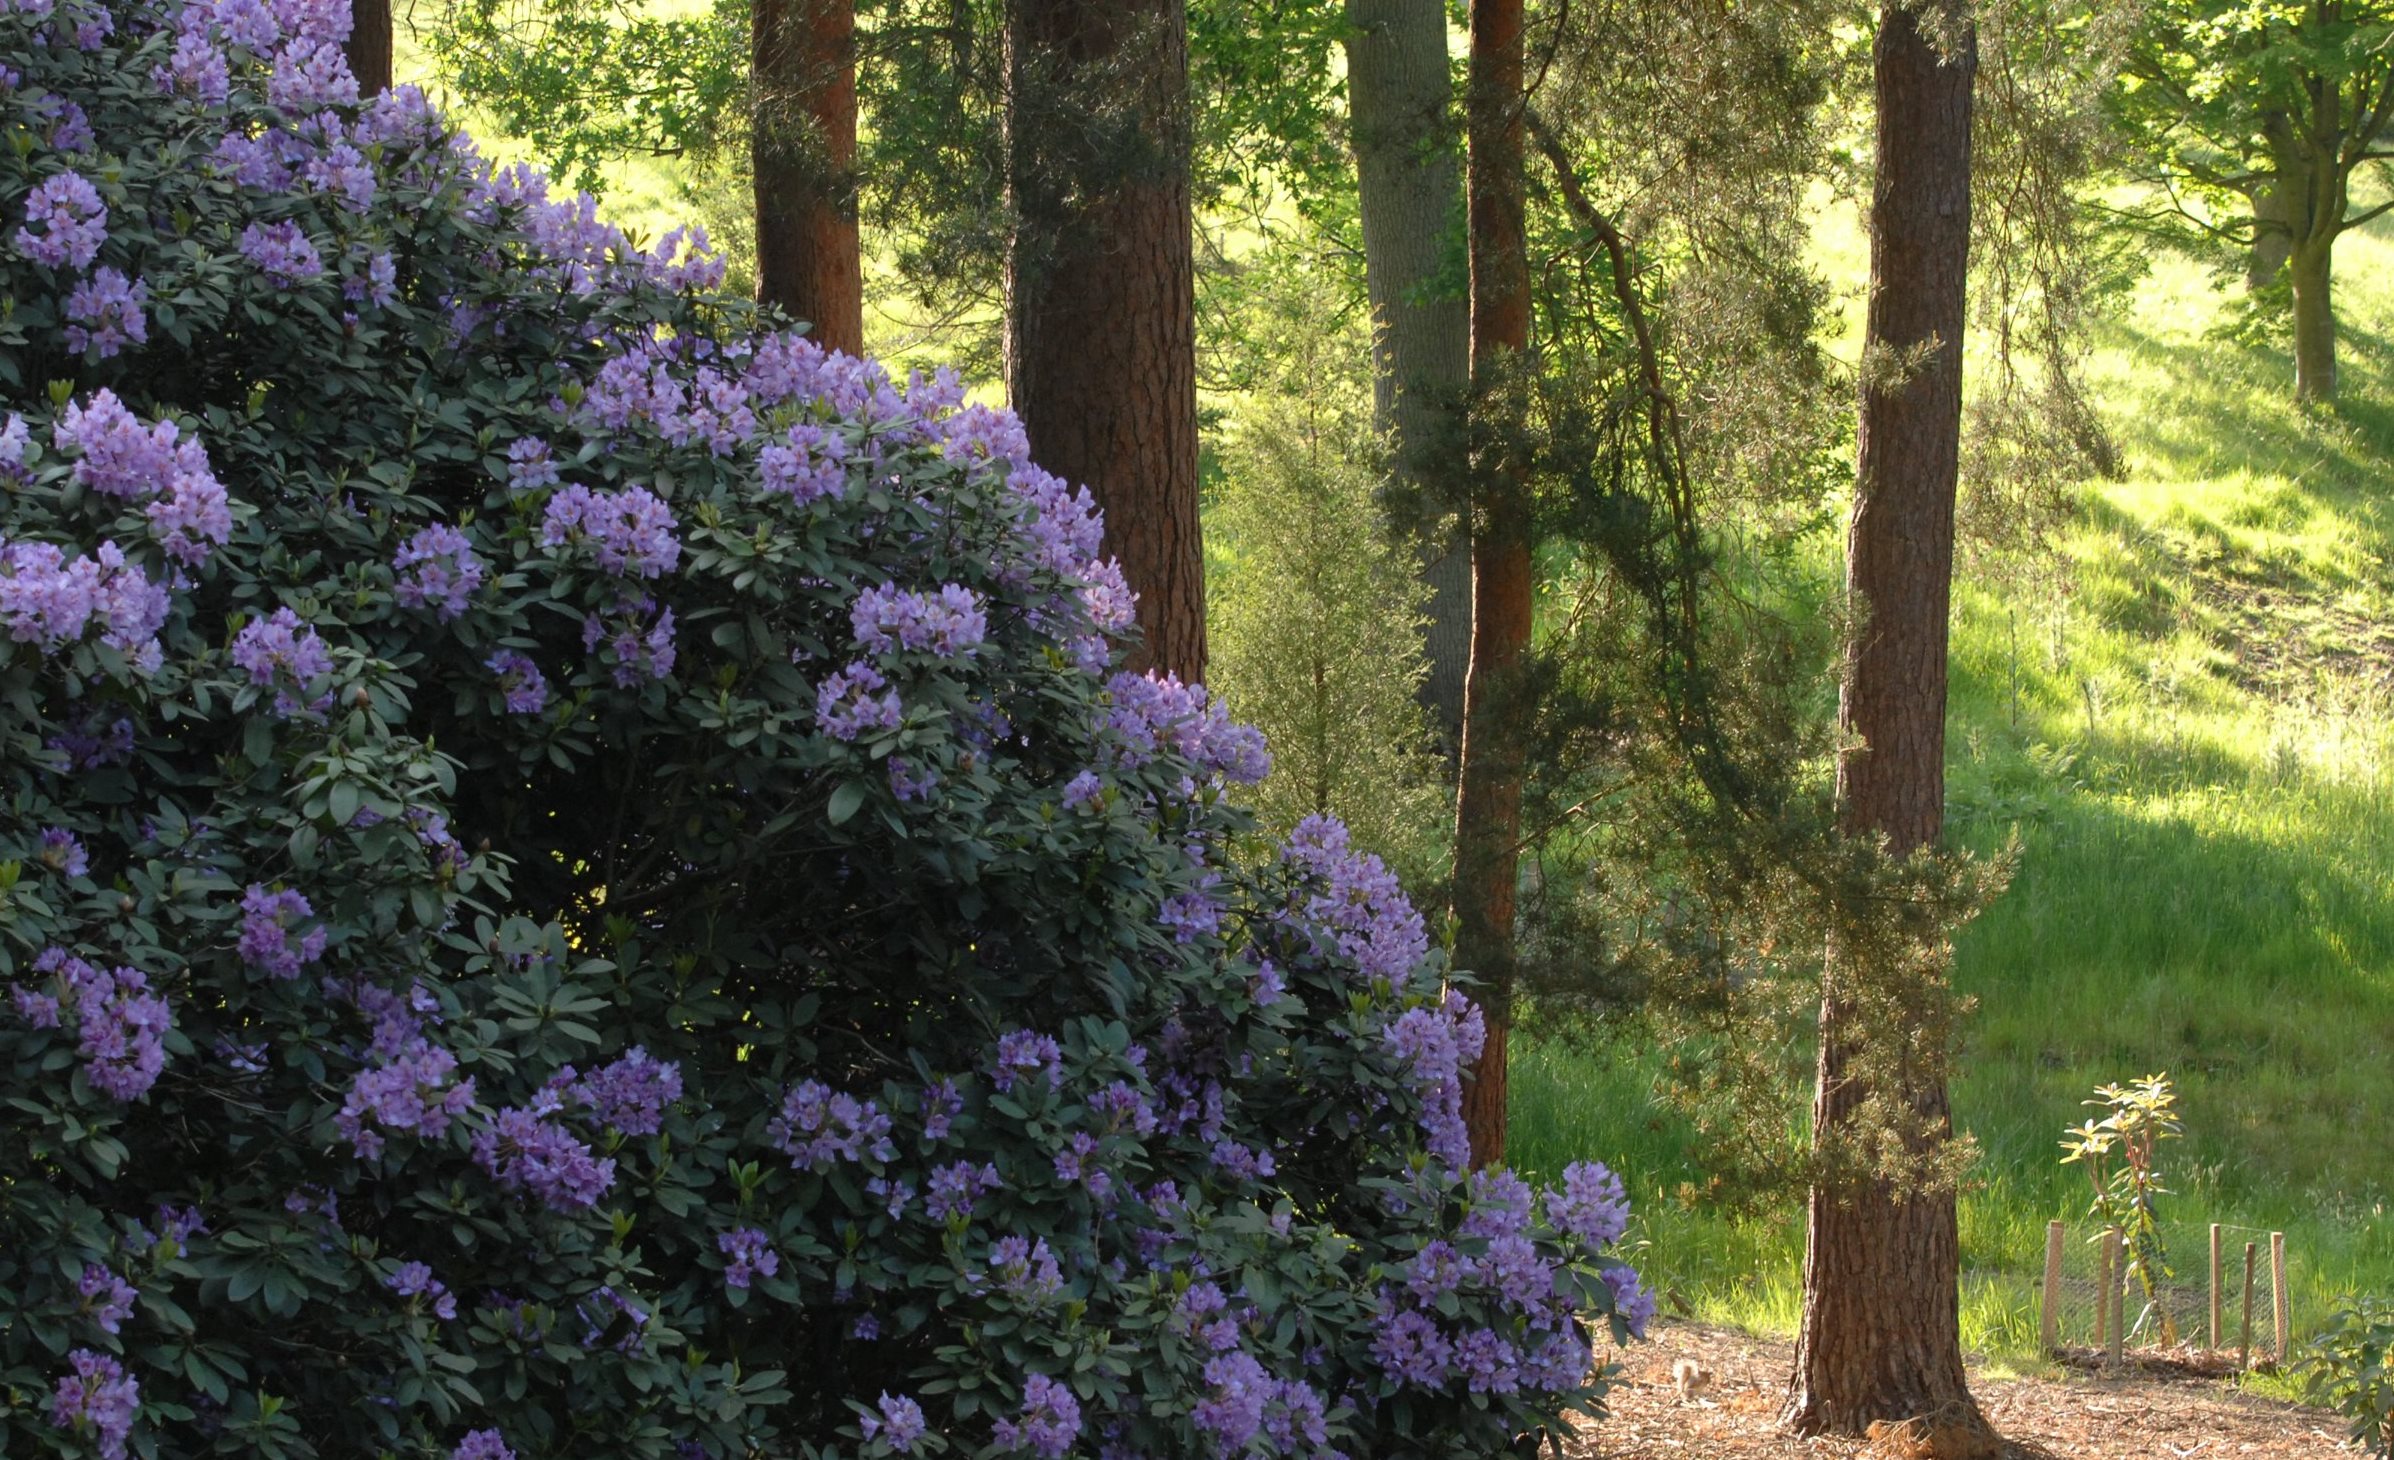 Rhododendron in woodland.jpg